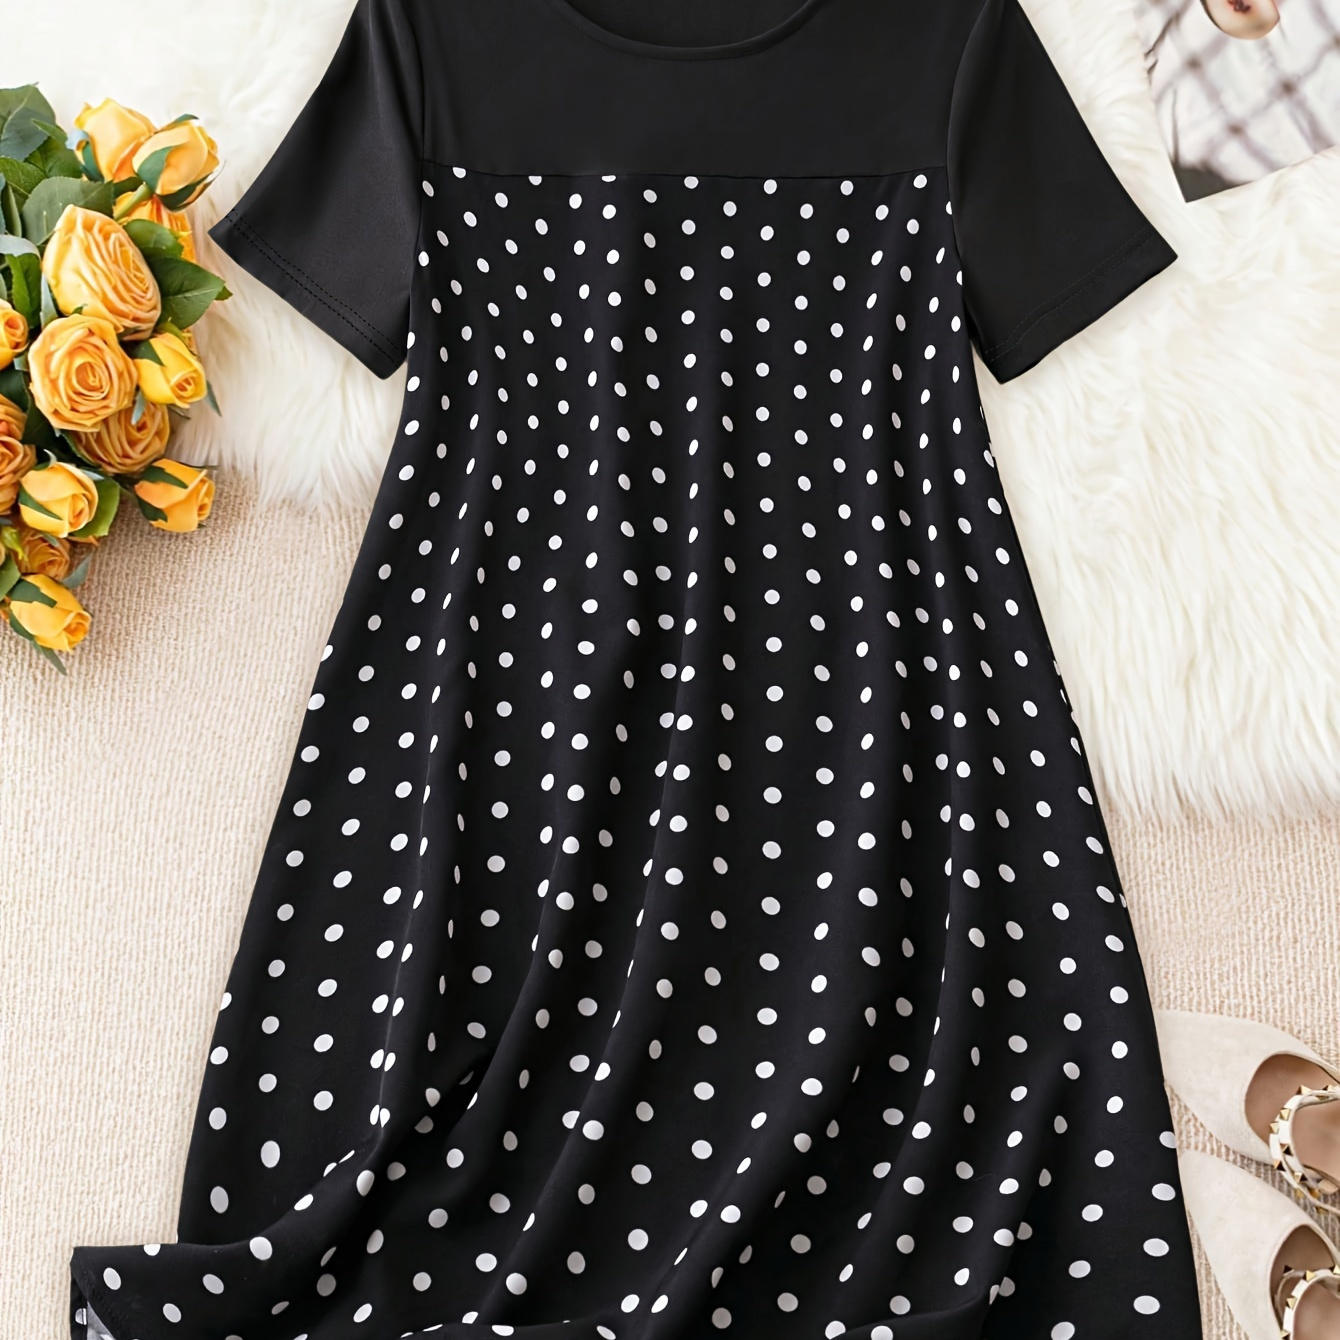 

Plus Size Polka Doe Print Patchwork Dress, Casual Short Sleeve Crew Neck Dress For Spring & Summer, Women's Plus Size Clothing